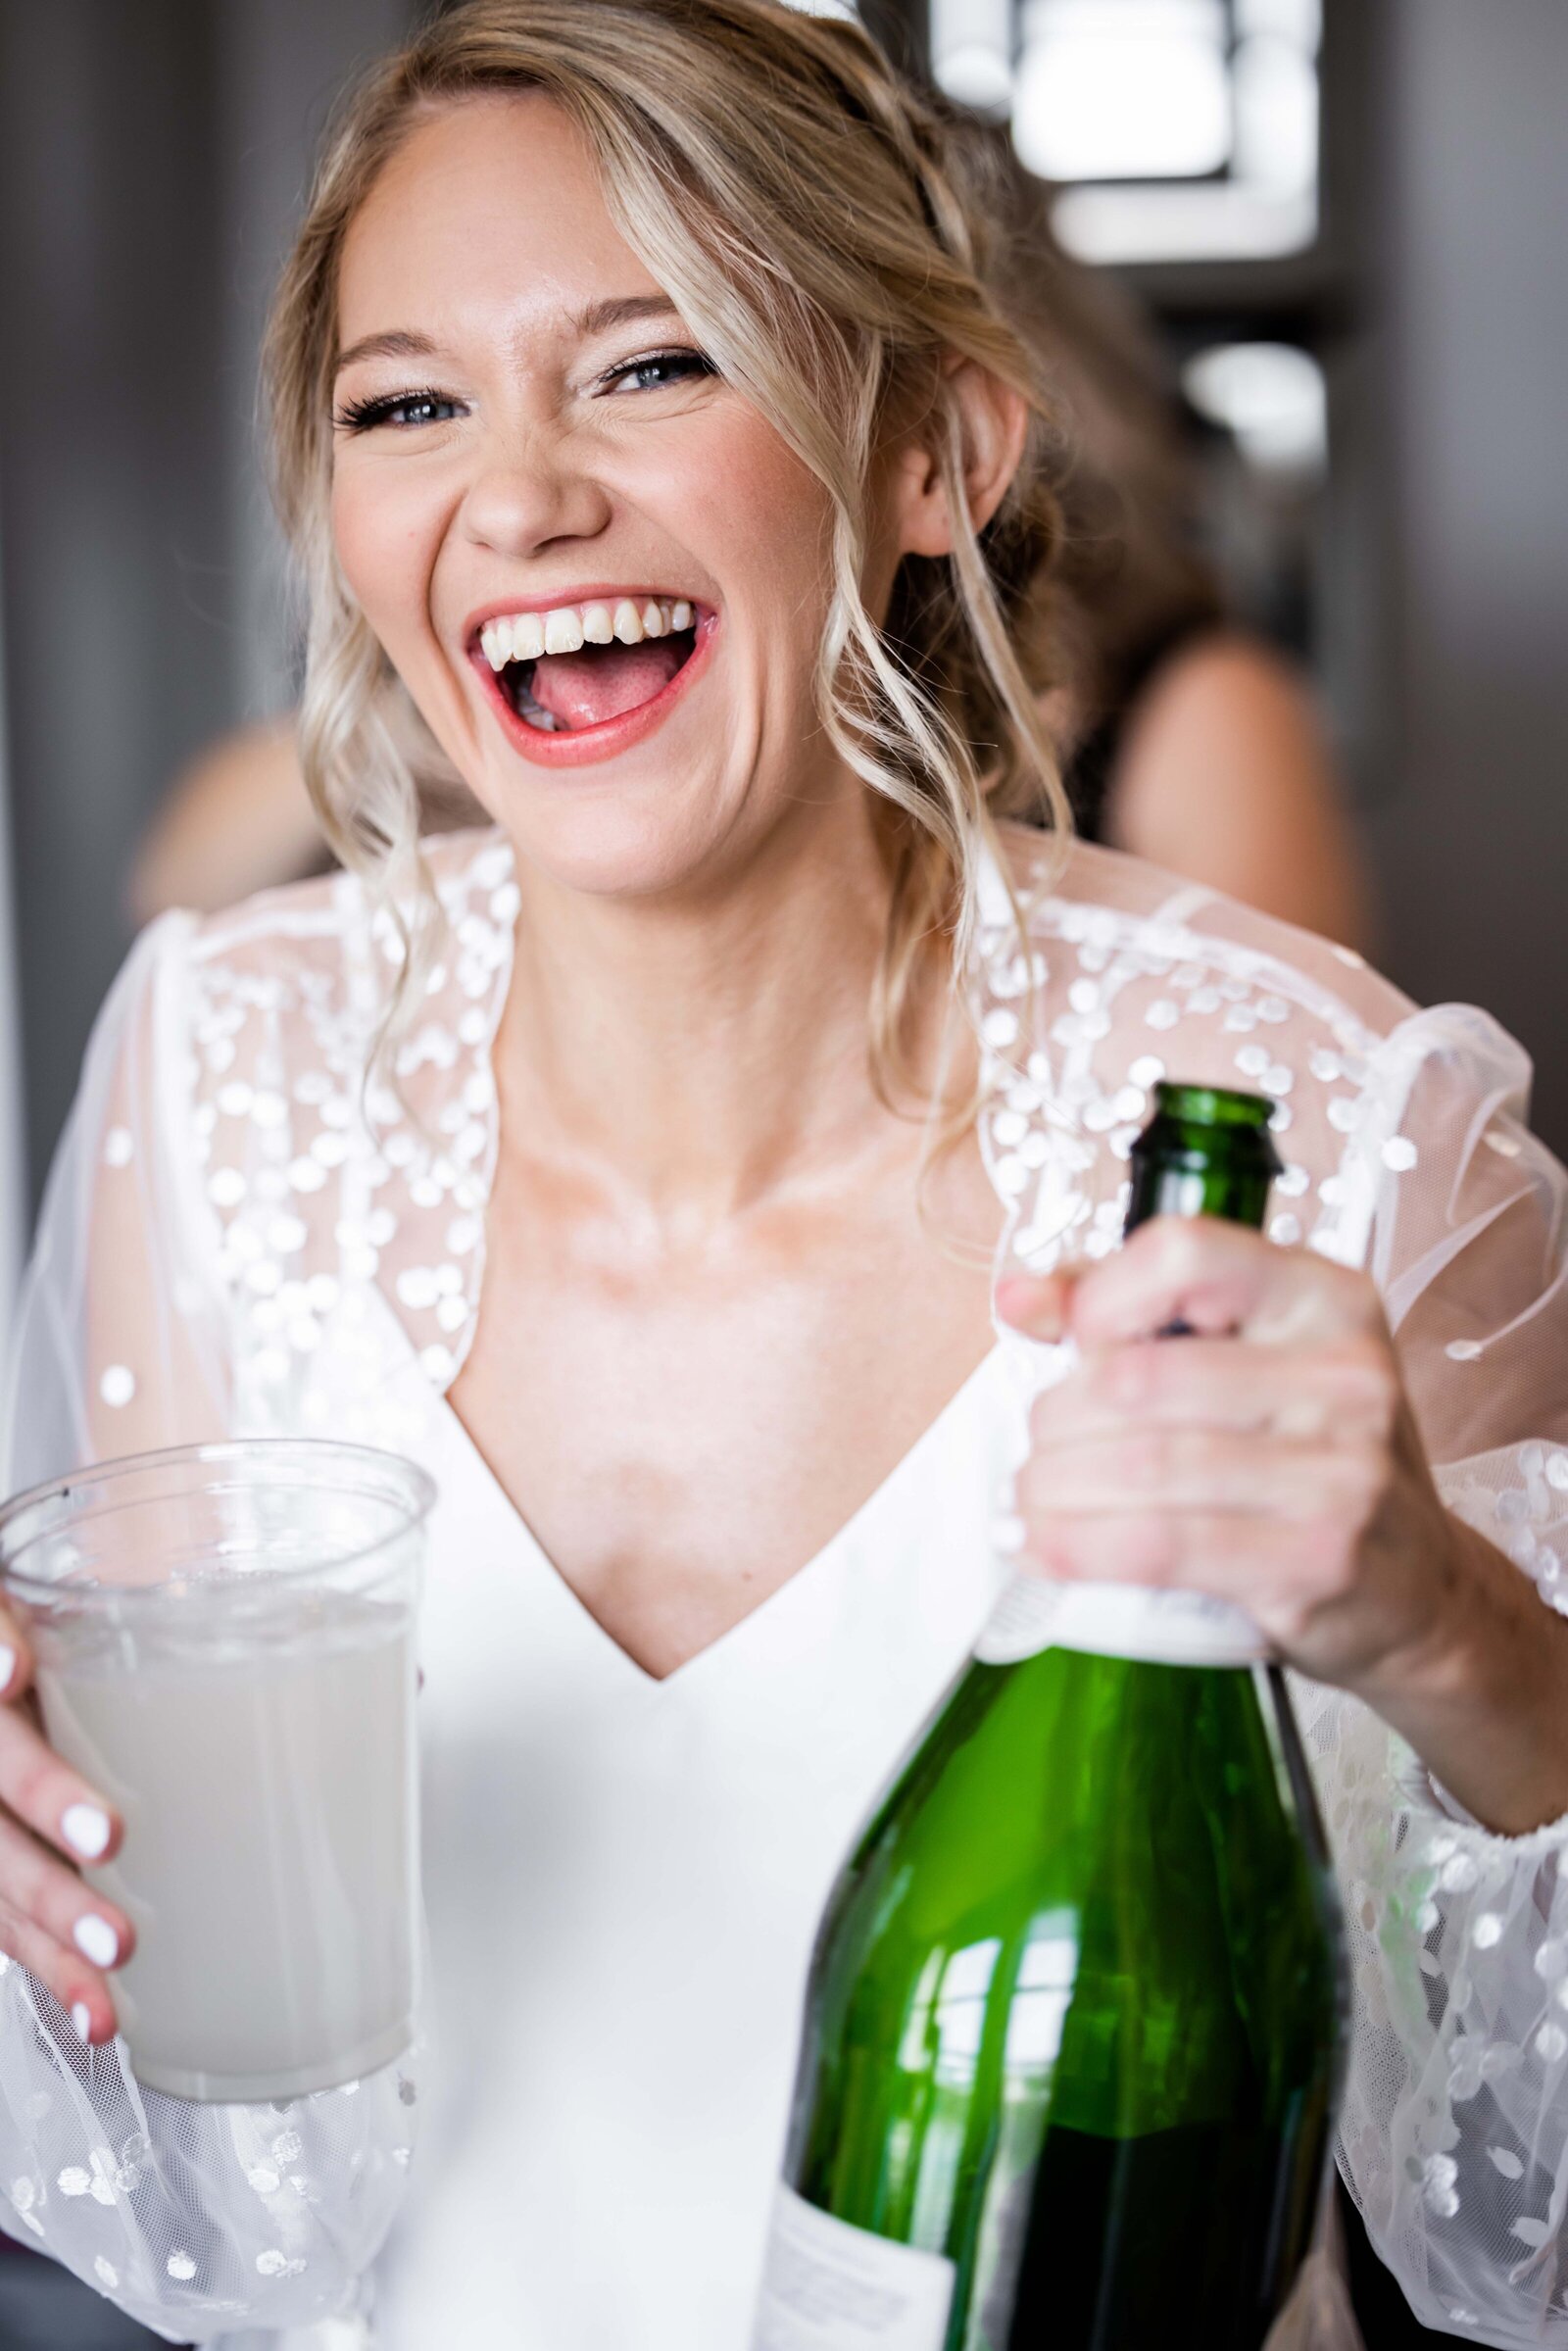 Capture the exuberant moment as Hailey readies to pop a bottle of champagne, symbolizing the start of her joyous wedding celebration. This vibrant image showcases the bride's anticipation and the festive spirit, perfect for couples seeking inspiration for their own celebratory moments. Embrace the blend of elegance and excitement that epitomizes a perfect wedding toast.